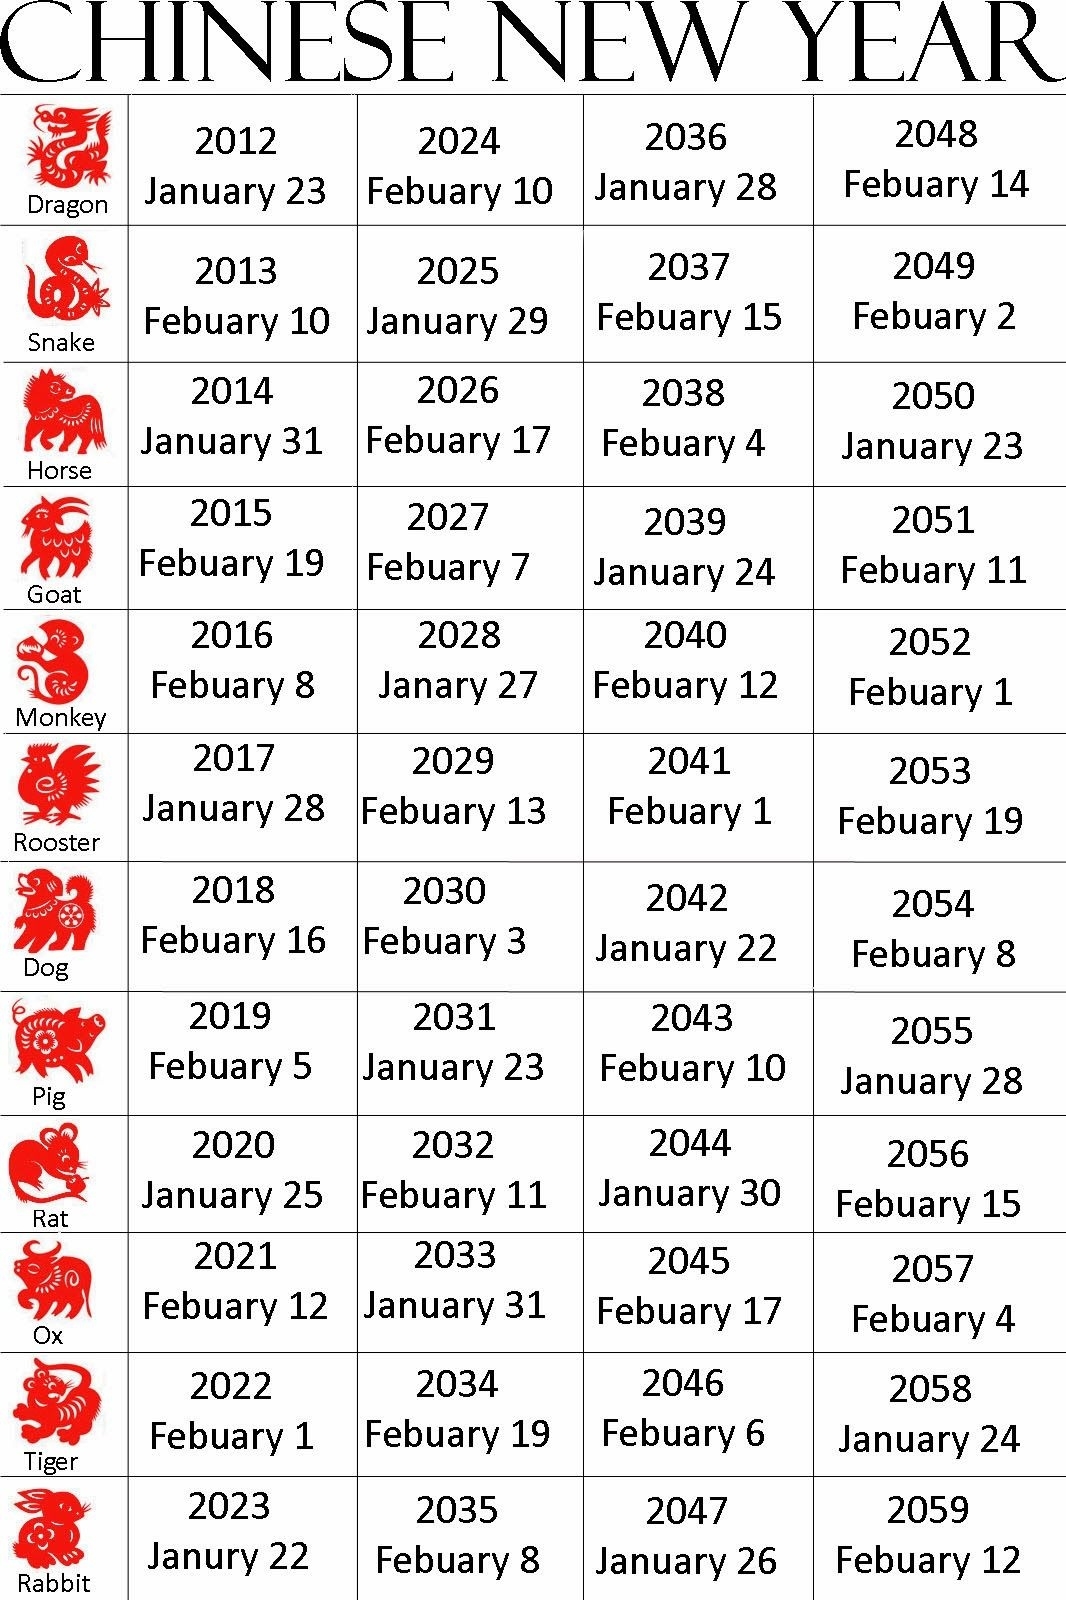 Chinese+New+Year 1,066×1,600 Pixels | Chinese Calendar Chinese Calendar With Zodiac Signs